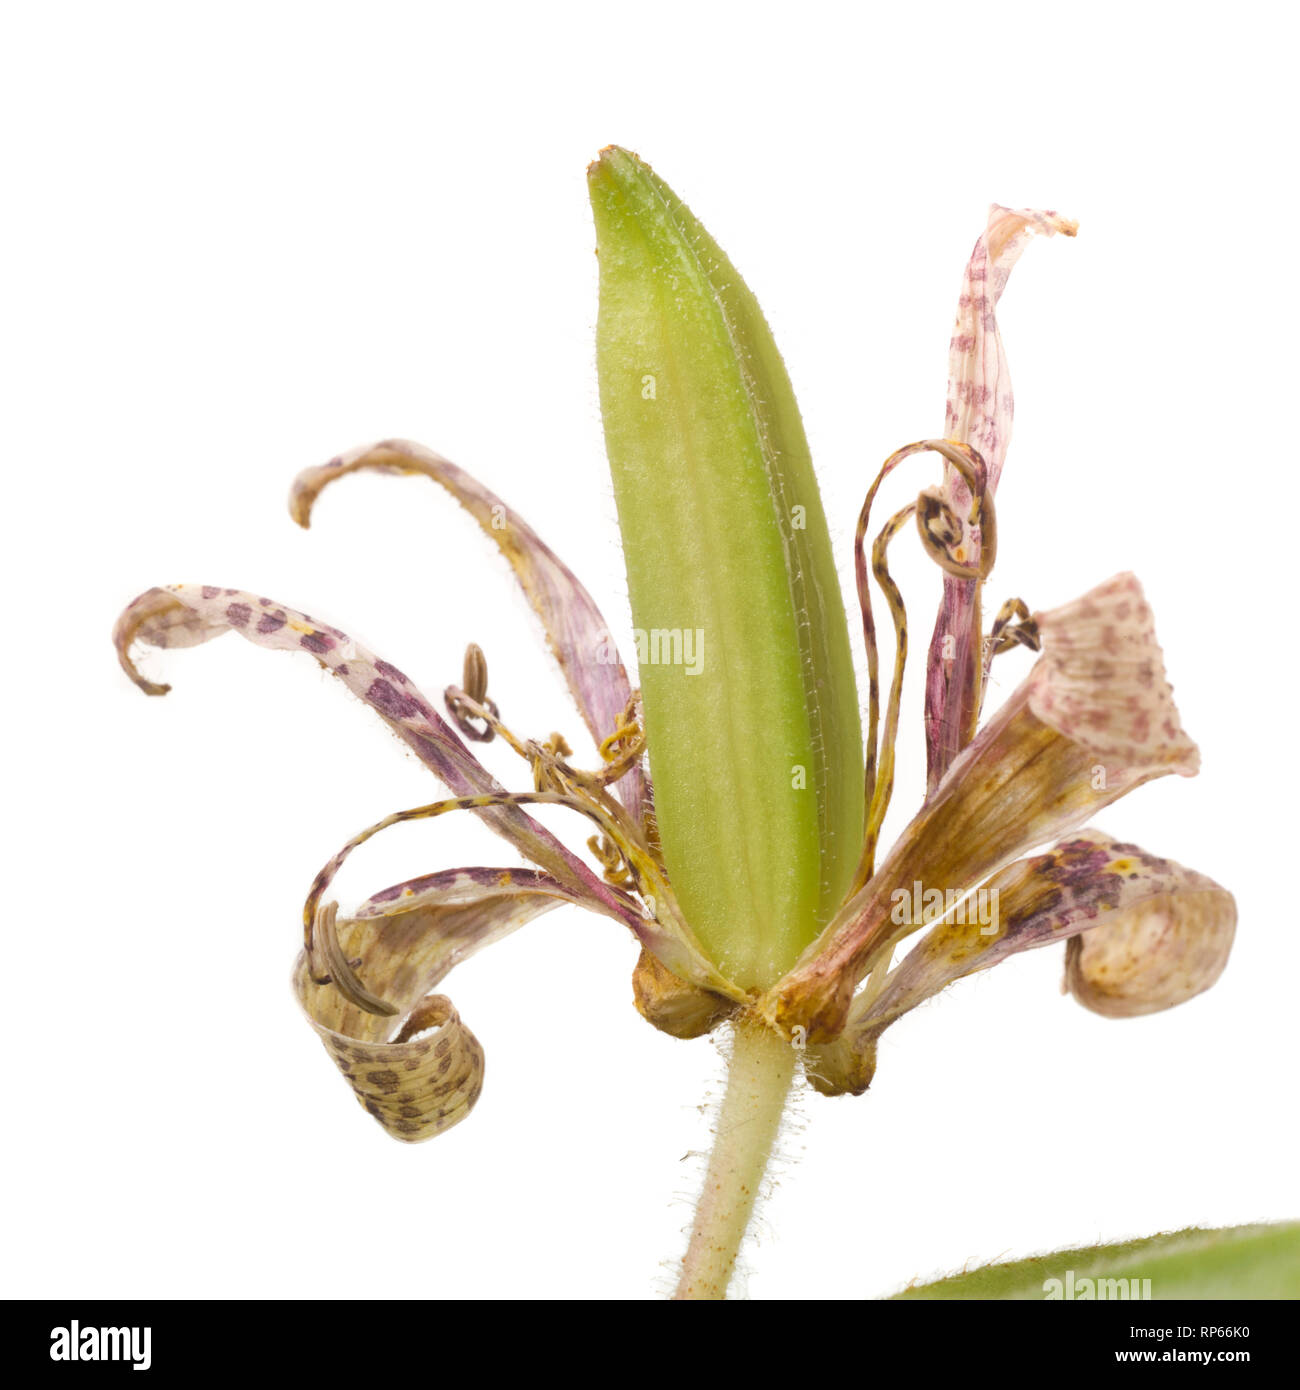 Toad Lily, Tricyrtis hirta, with Seed Pod against White Background Stock Photo